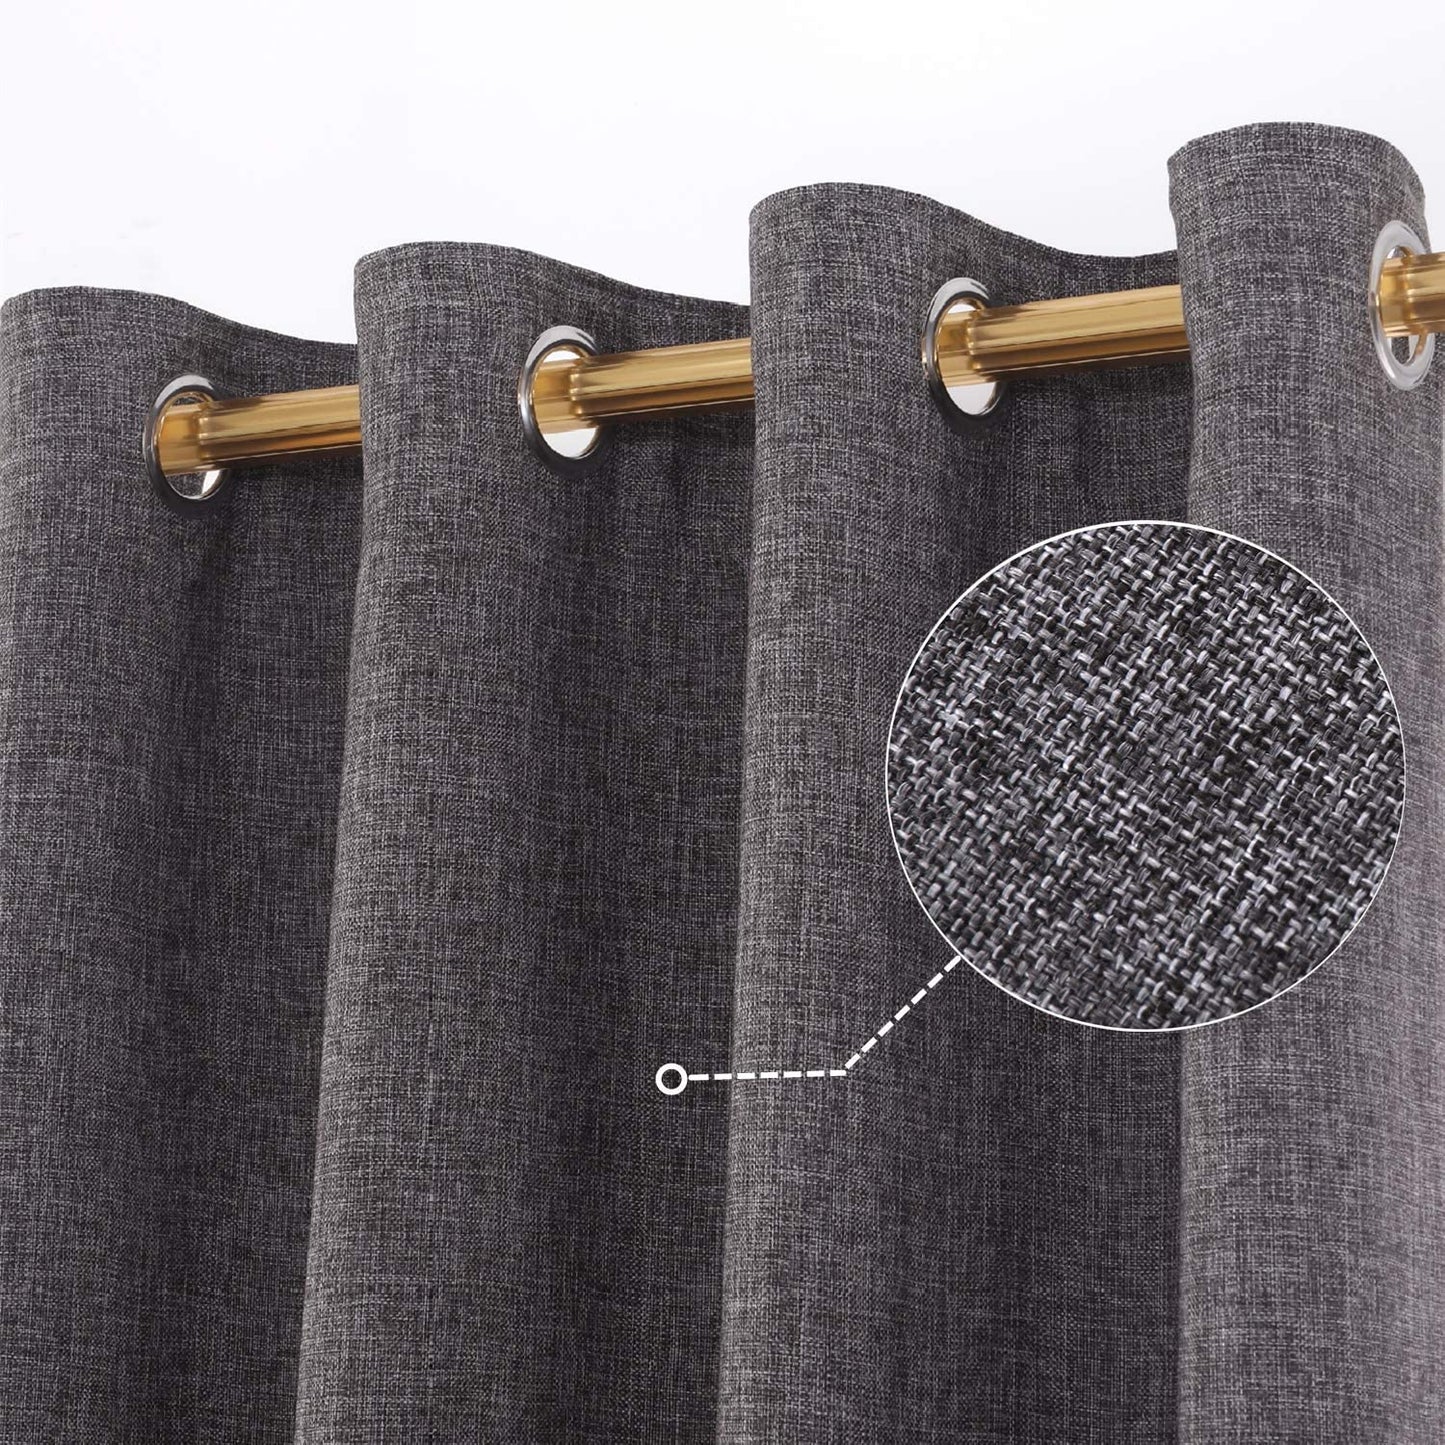 Faux Linen 100% Blackout Curtains Natural Look Durability for Bedroom